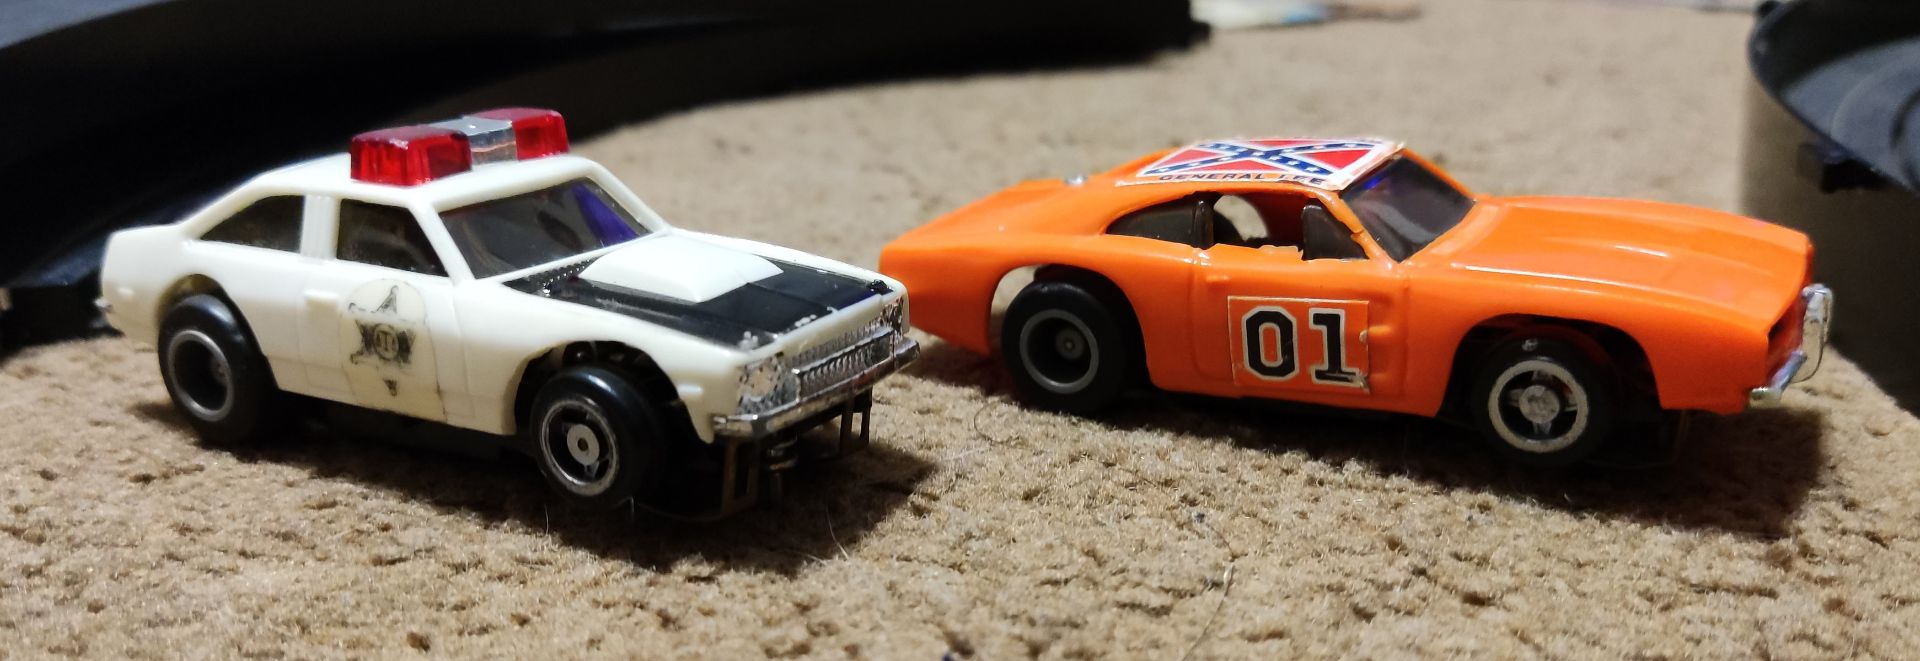 1 x Vintage Dukes of Hazzard Electric Slot Racing Set - Used - CL444 - NO VAT ON THE HAMMER - - Image 2 of 26